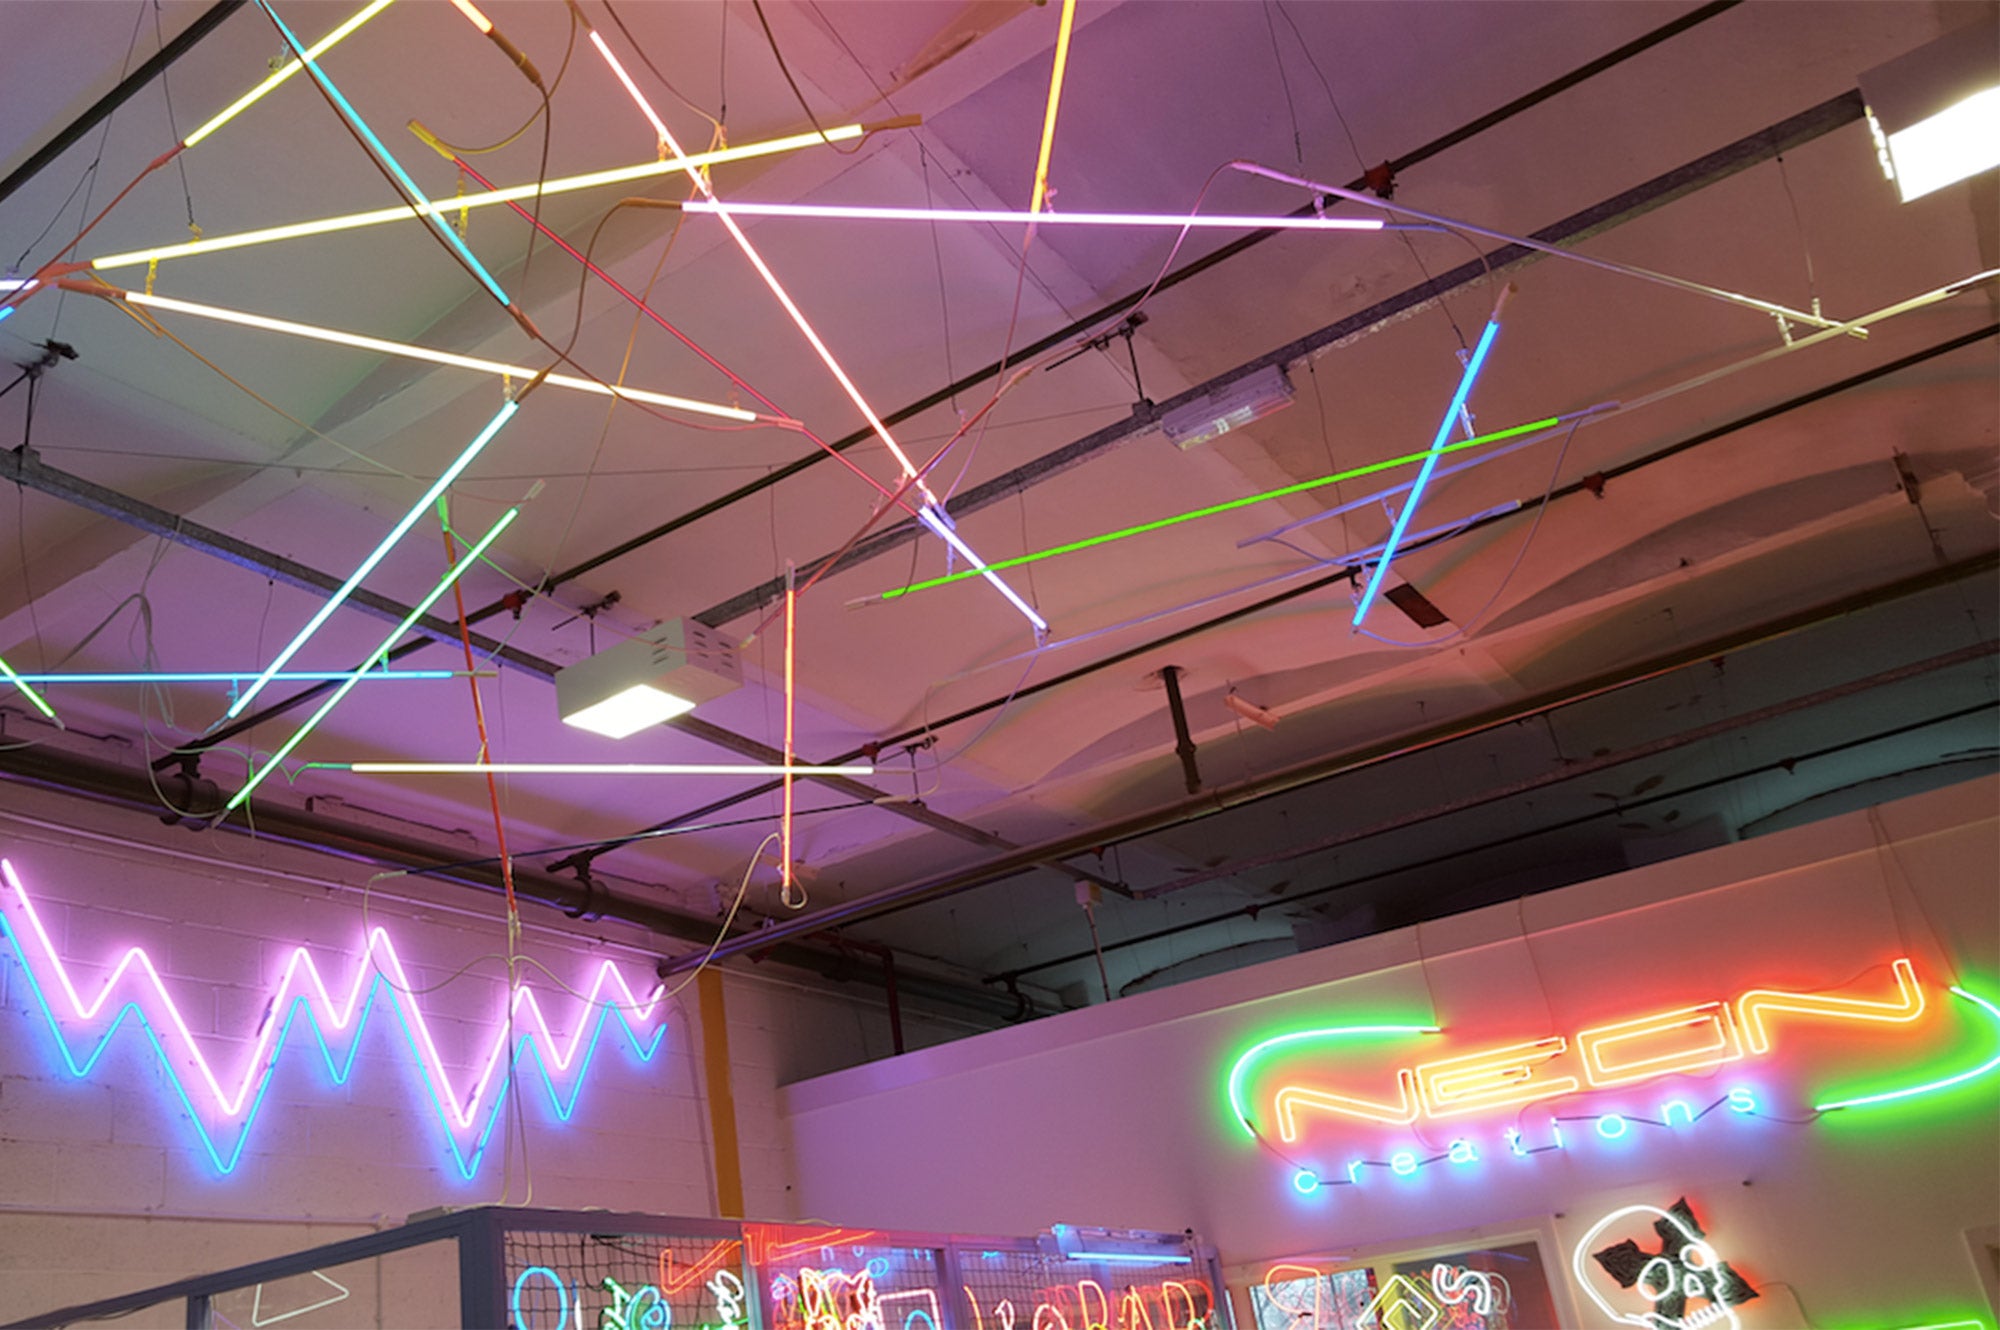 Throwback Thursday: Our Favourite Neon Creations!